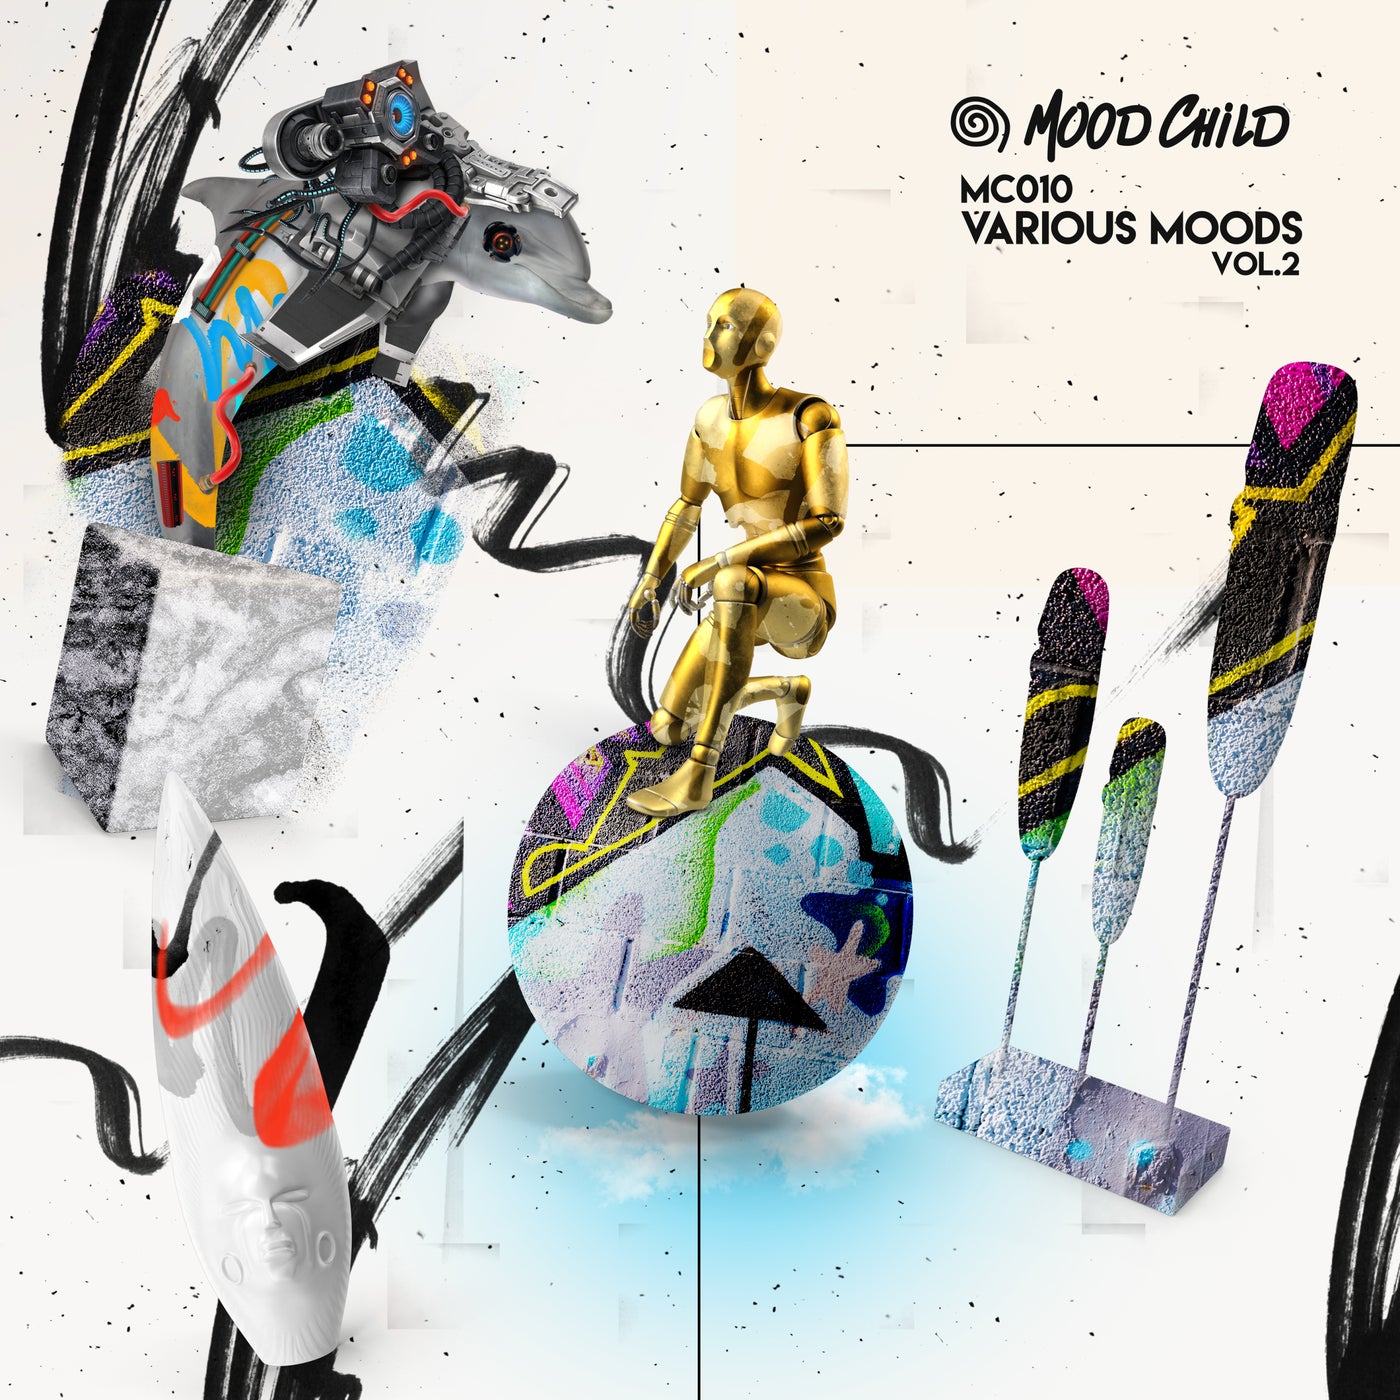 image cover: VA - Various Moods, Vol.2 on Mood Child